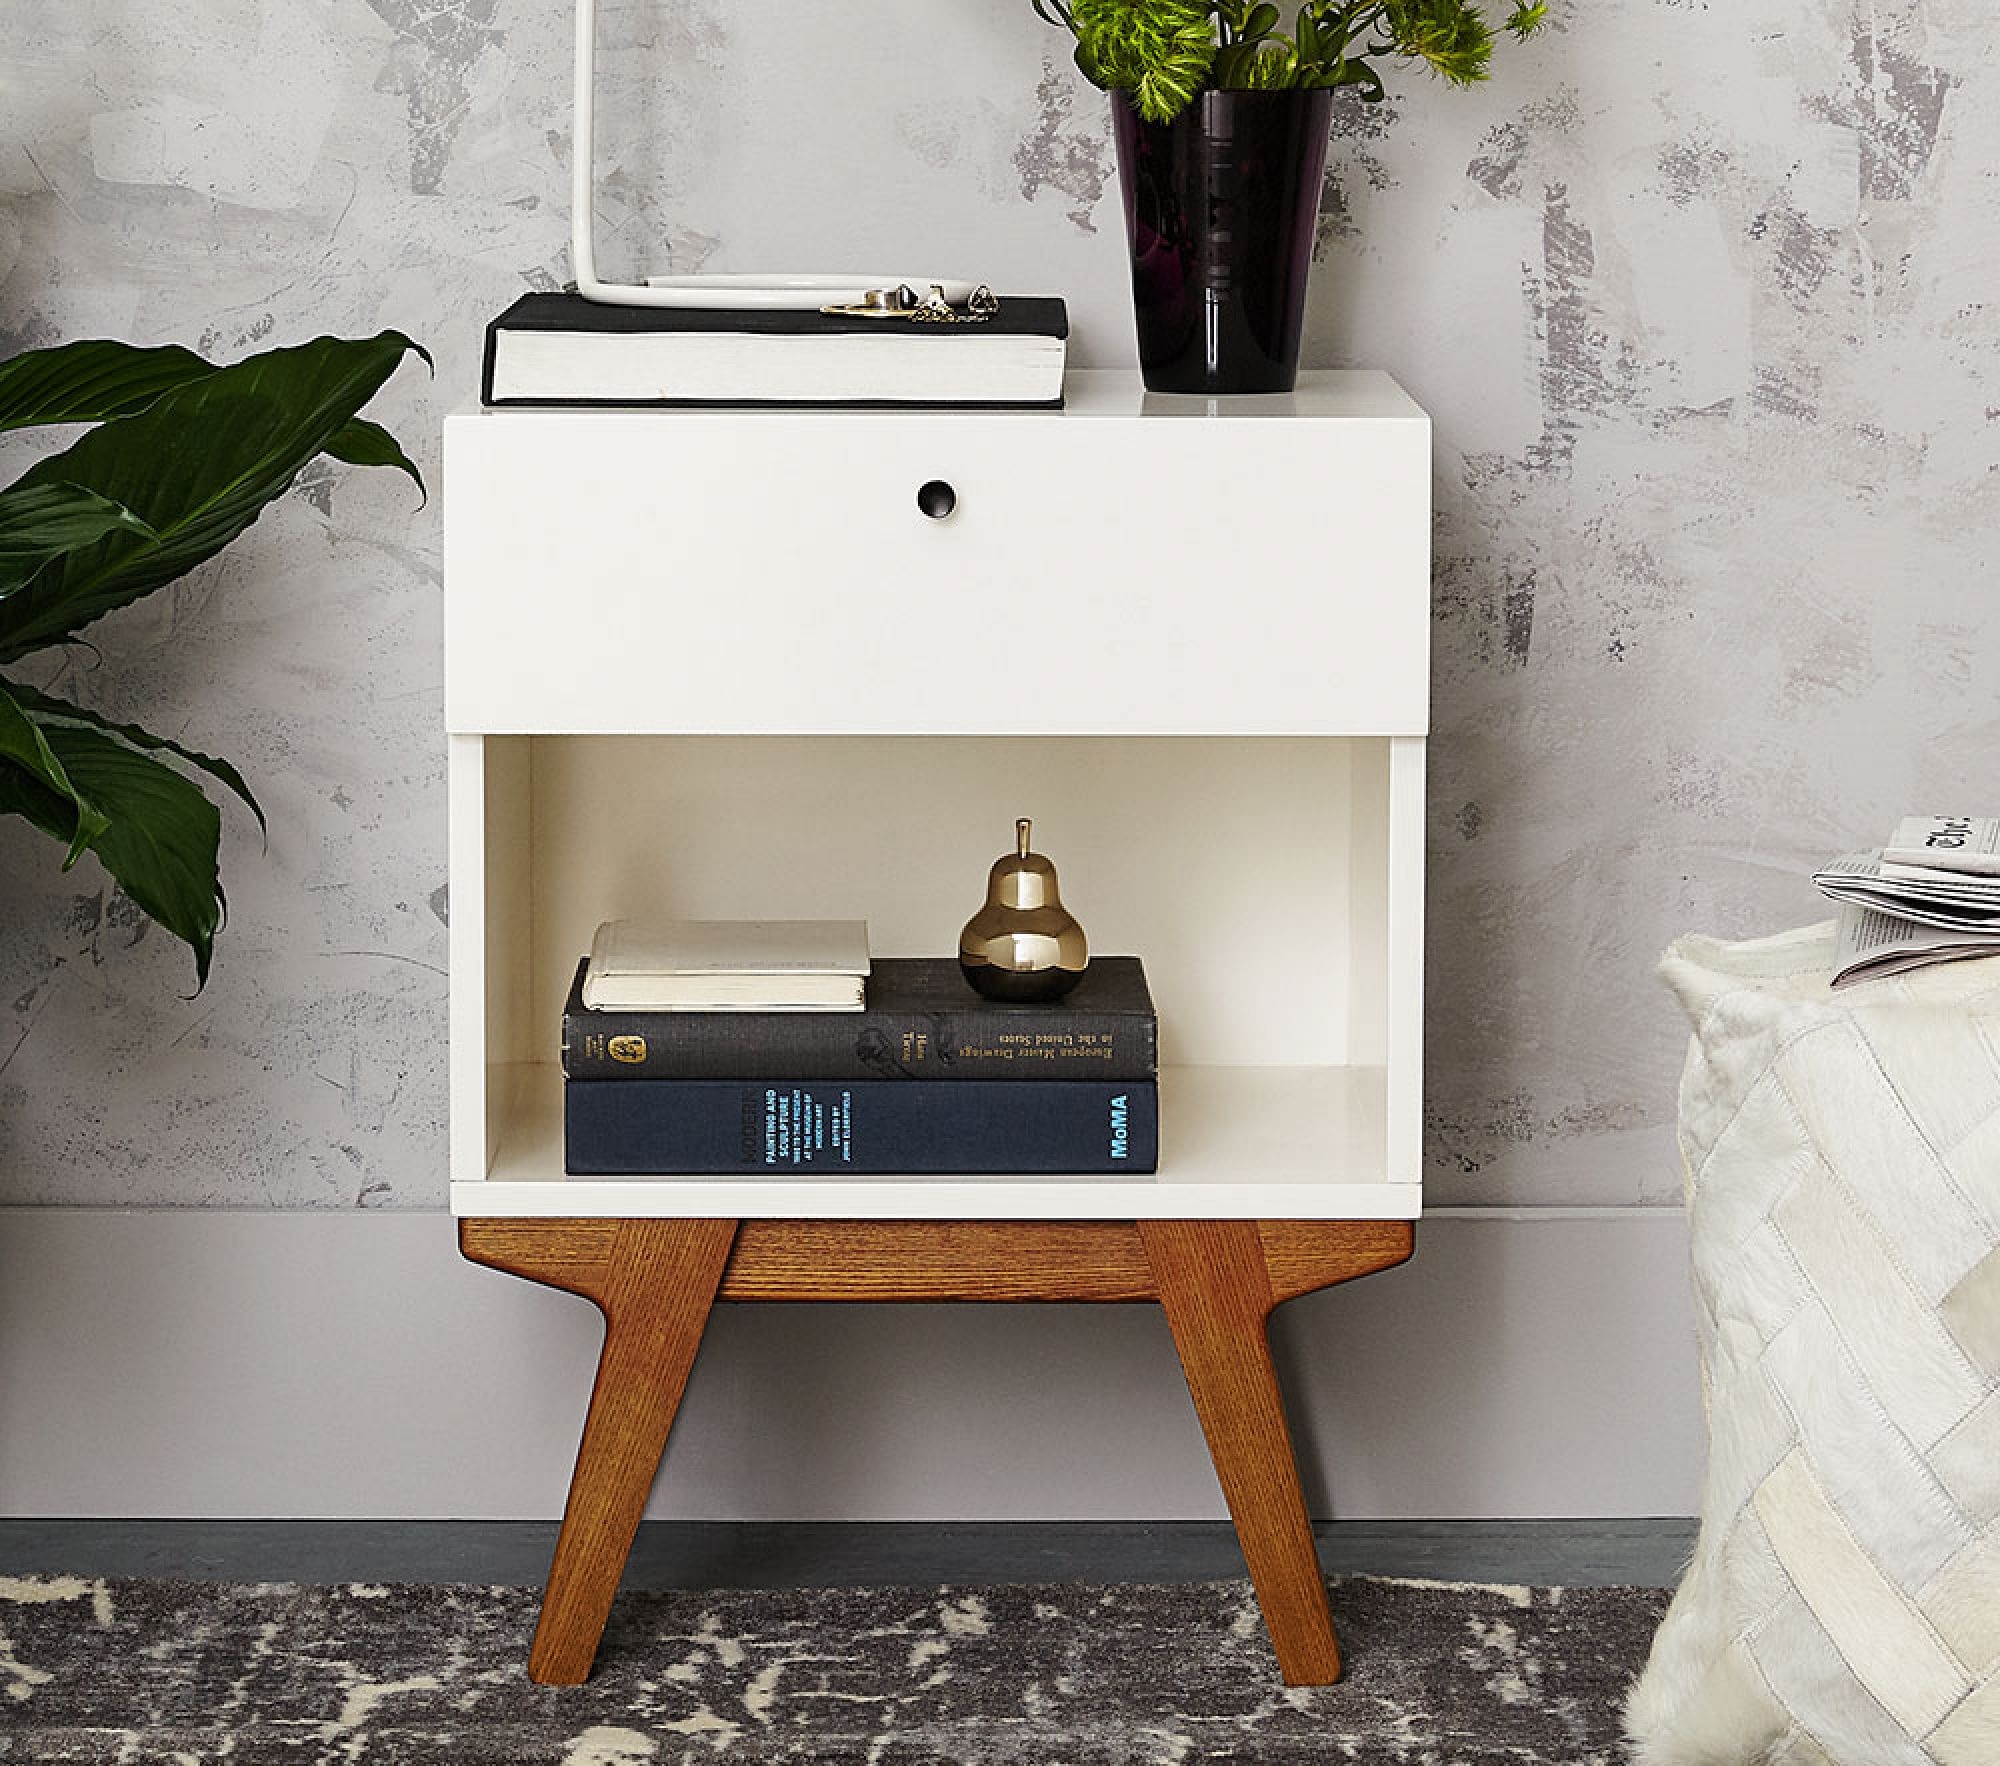 west elm x pbk Modern Nightstand, White Lacquer - Image 5